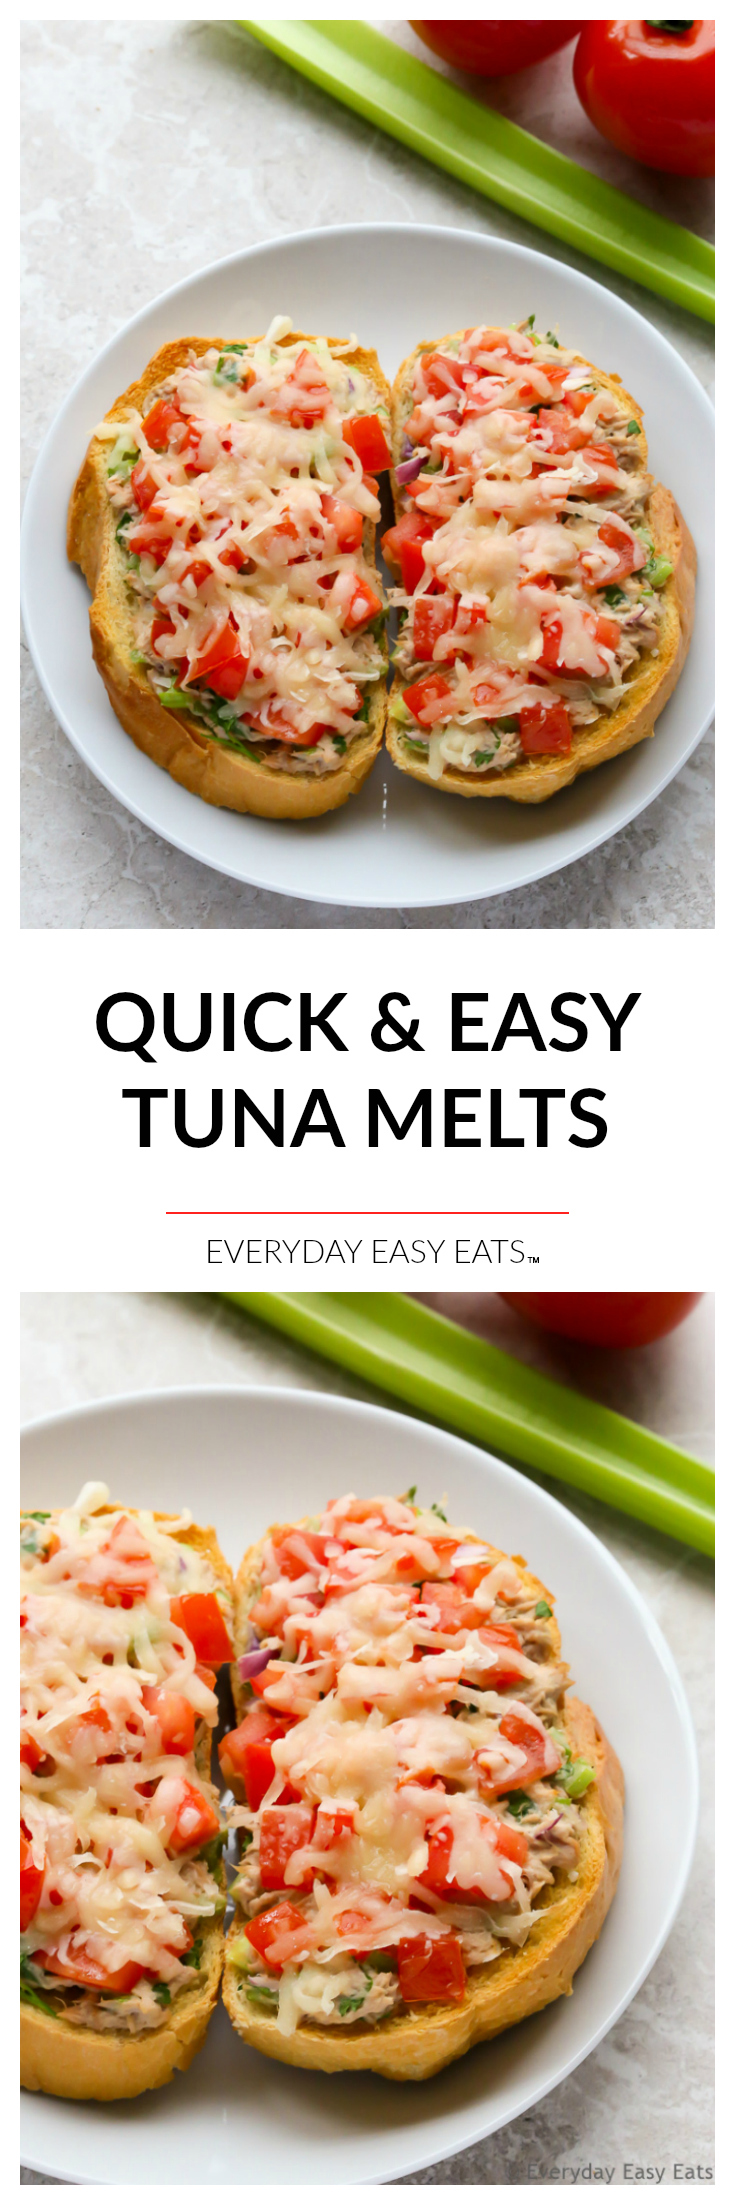 Quick Tuna Melts - 15 minutes are all you need to make these tasty, comforting sandwiches. | EverydayEasyEats.com